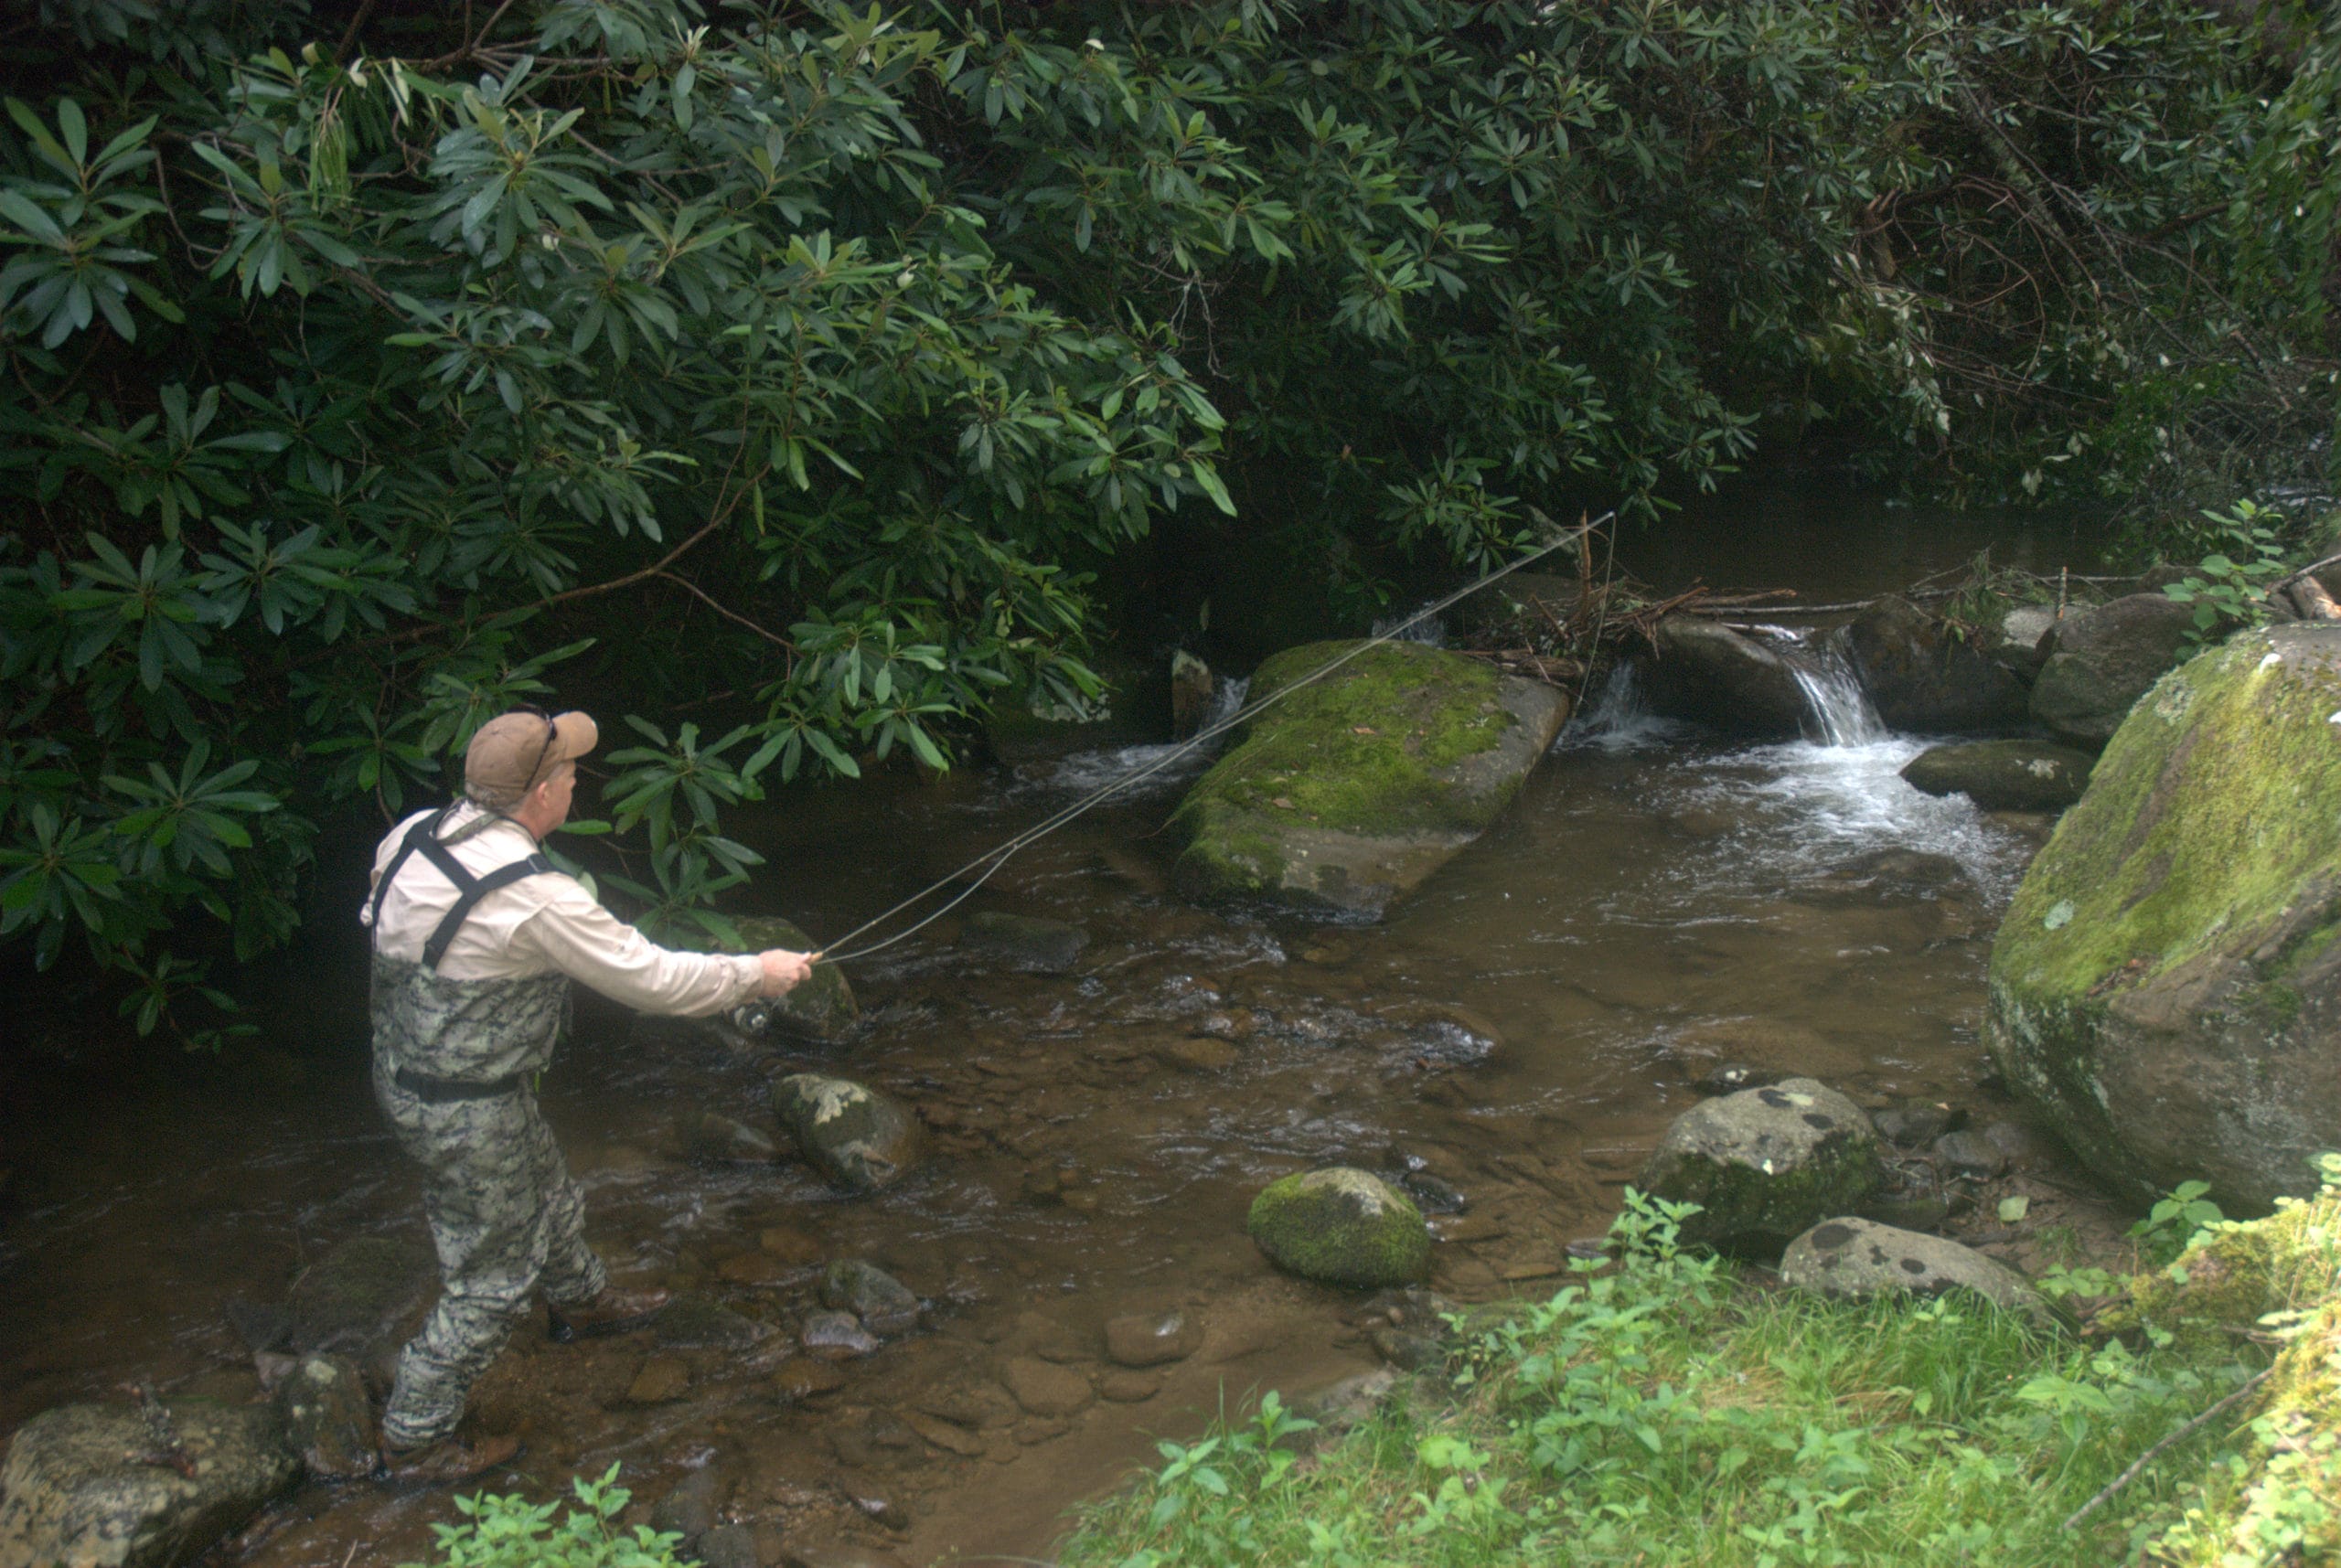 Anglers fishing the Smoky Mountains often have to contend with tight cover.